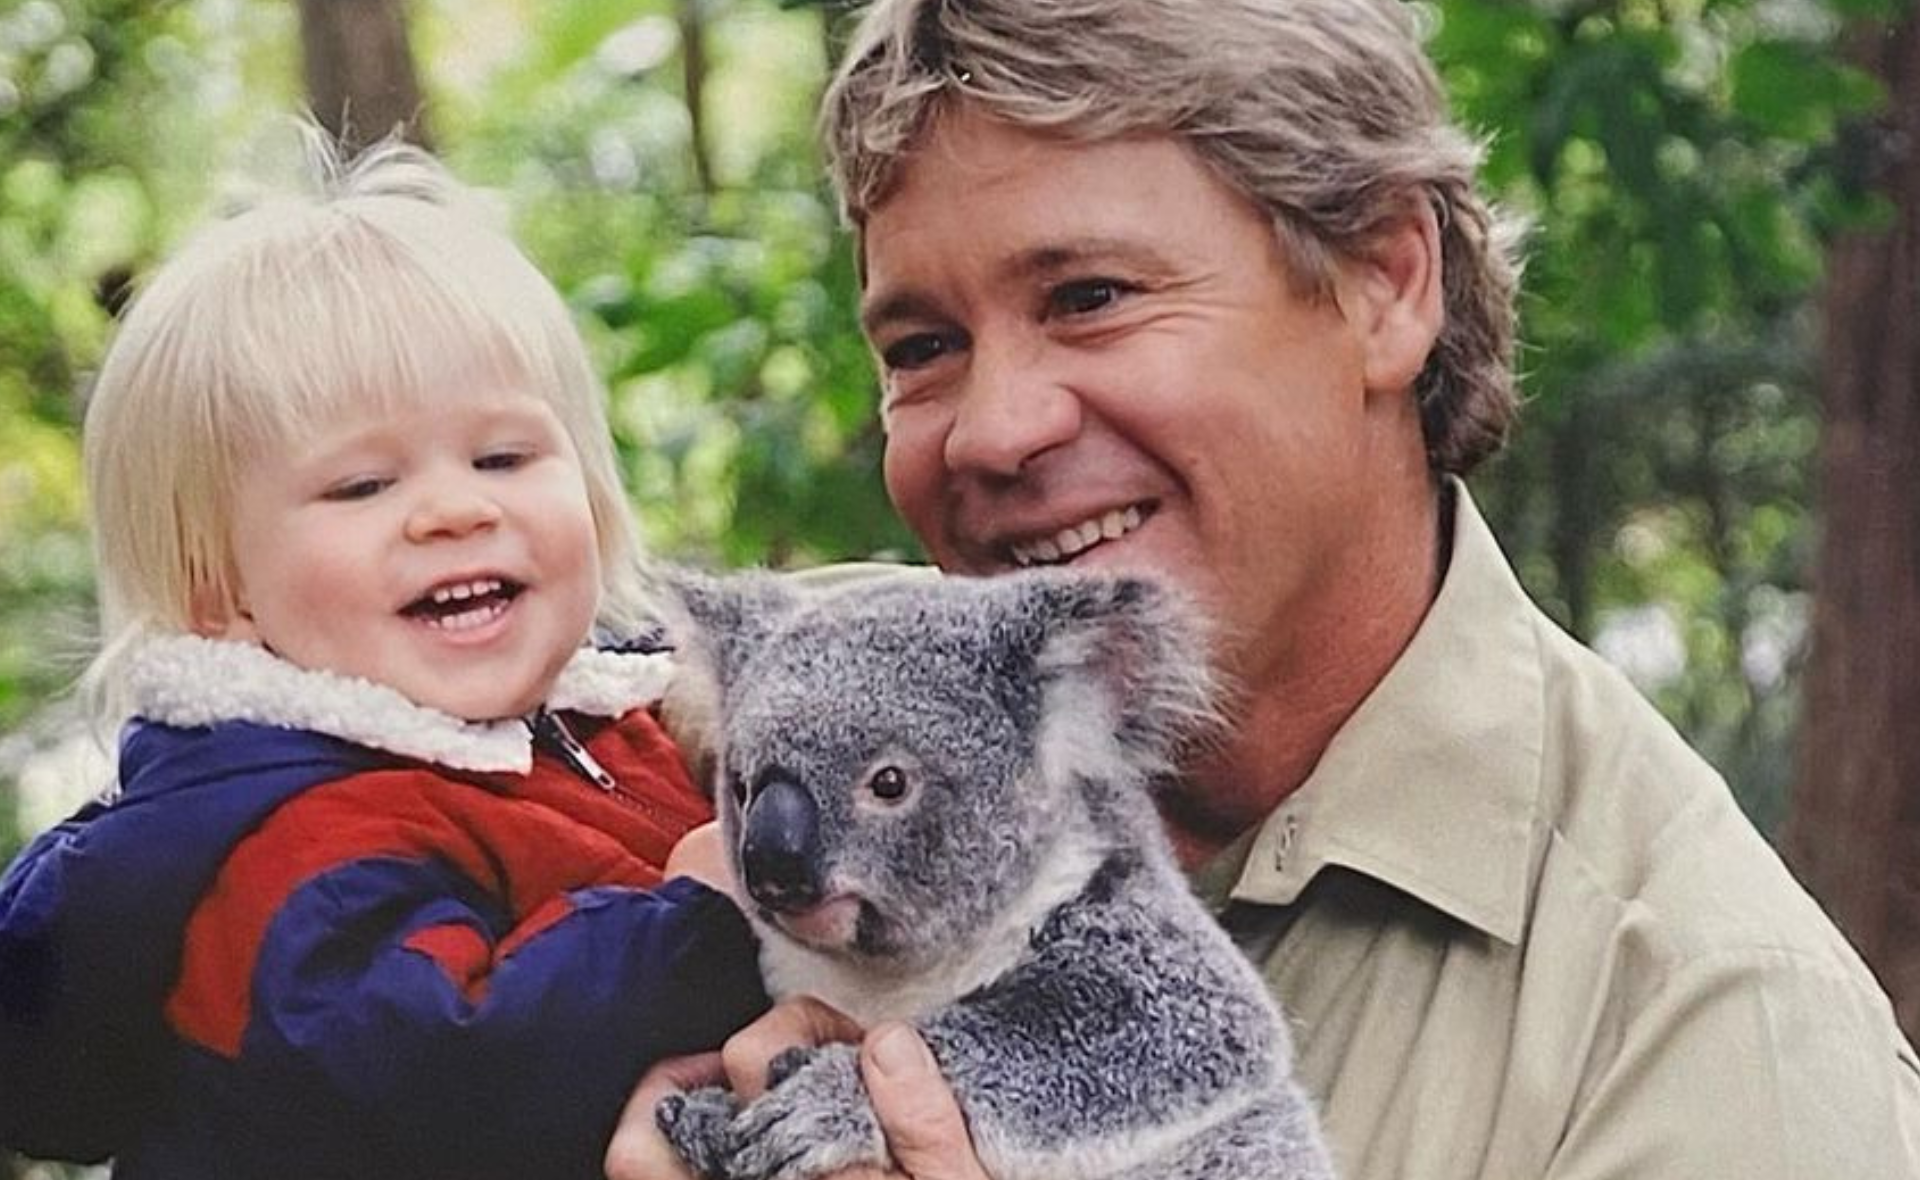 “I just hope he’d be proud”: Robert Irwin left emotional after birthday tribute from late dad, Steve